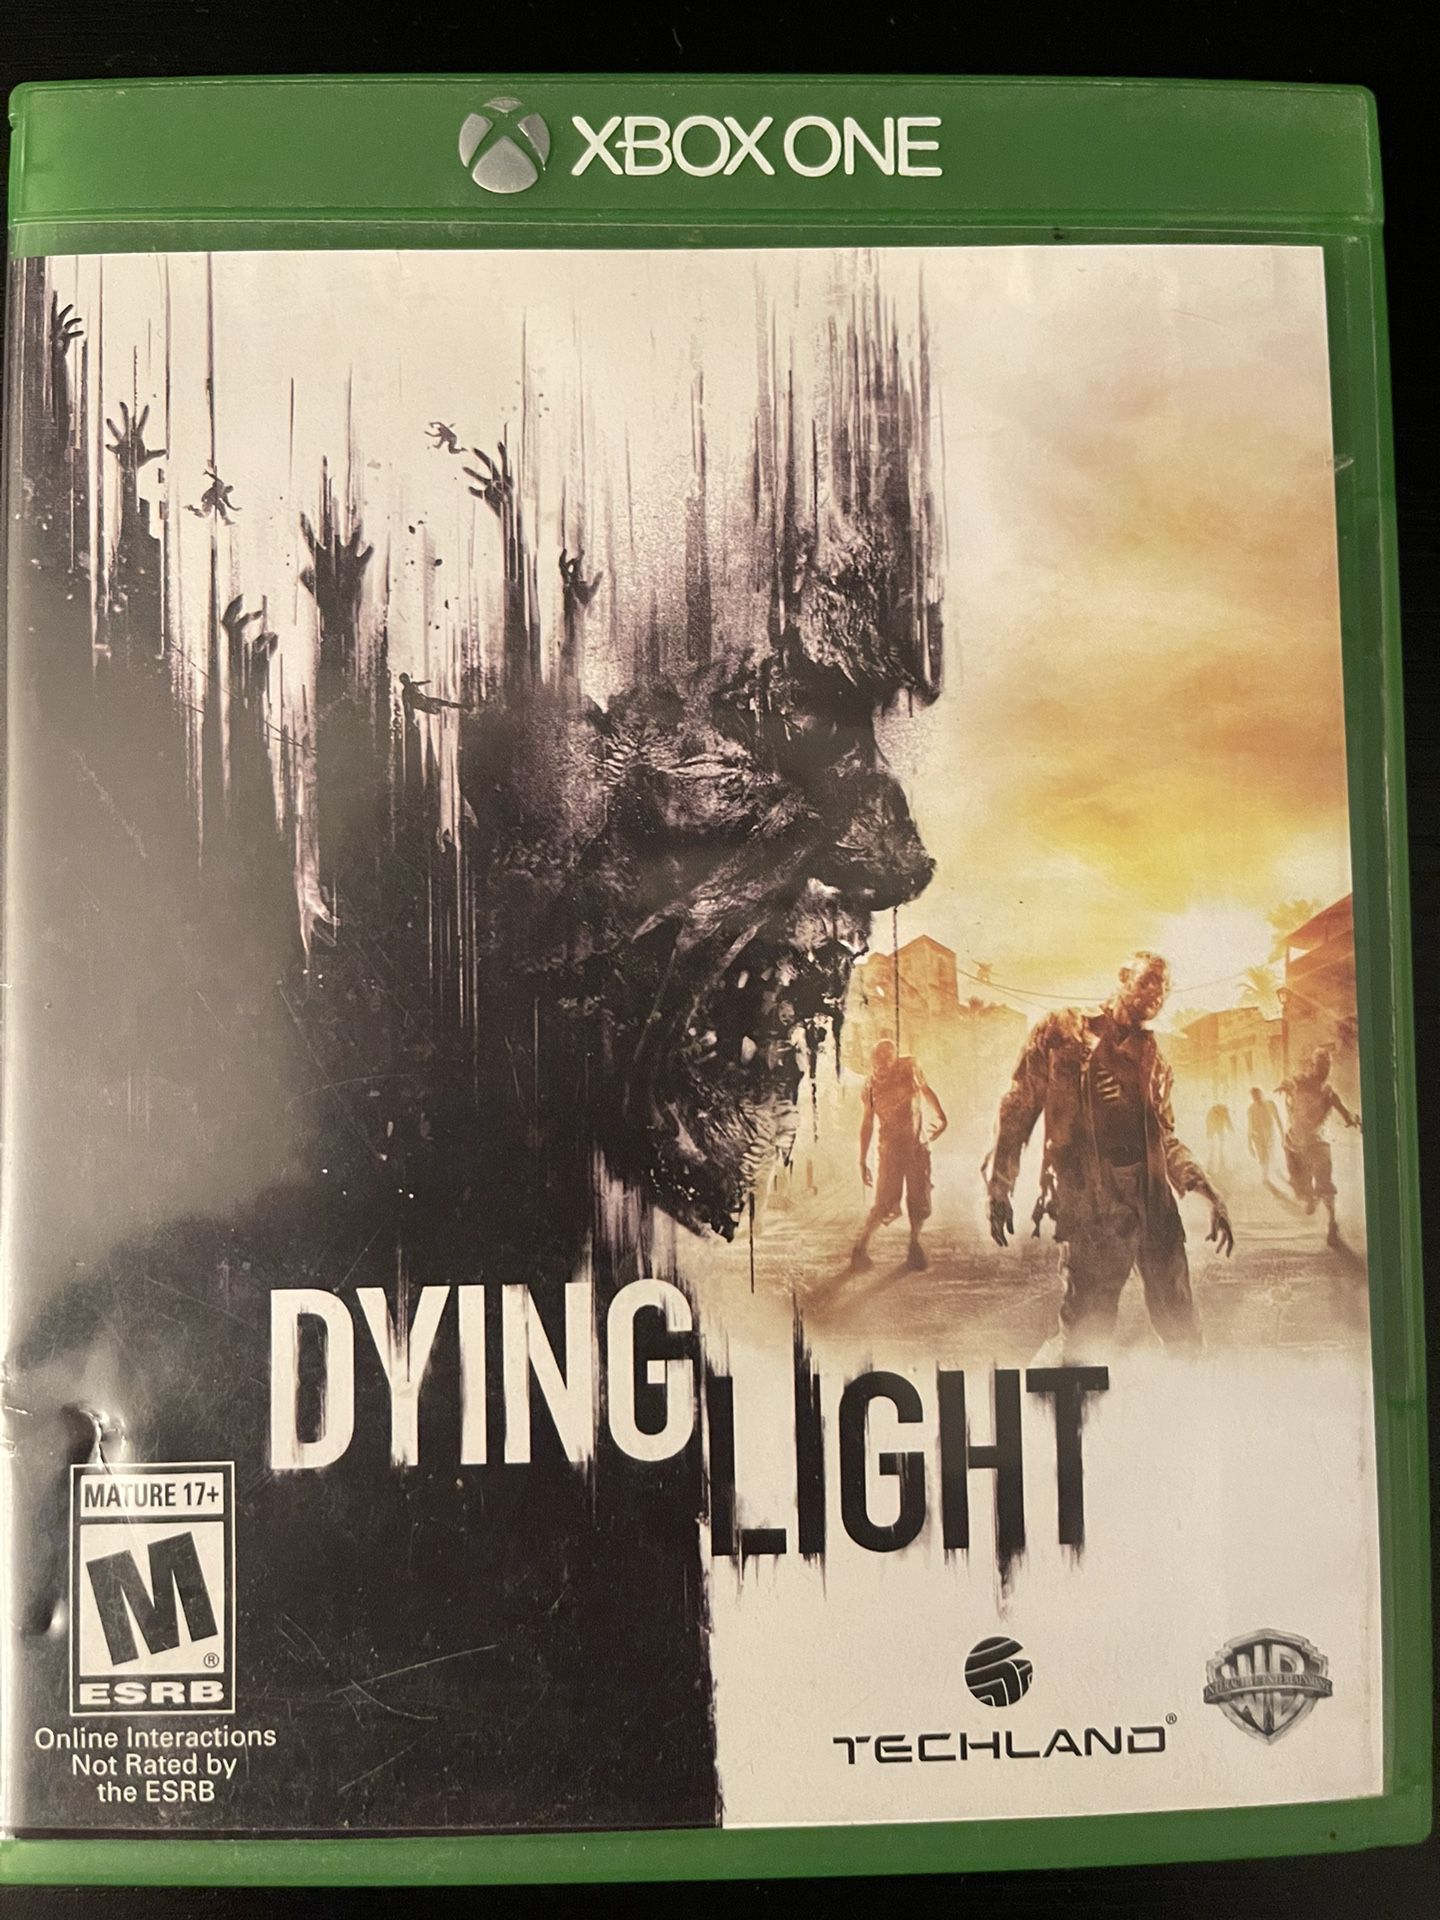 DyingLight Xbox one game